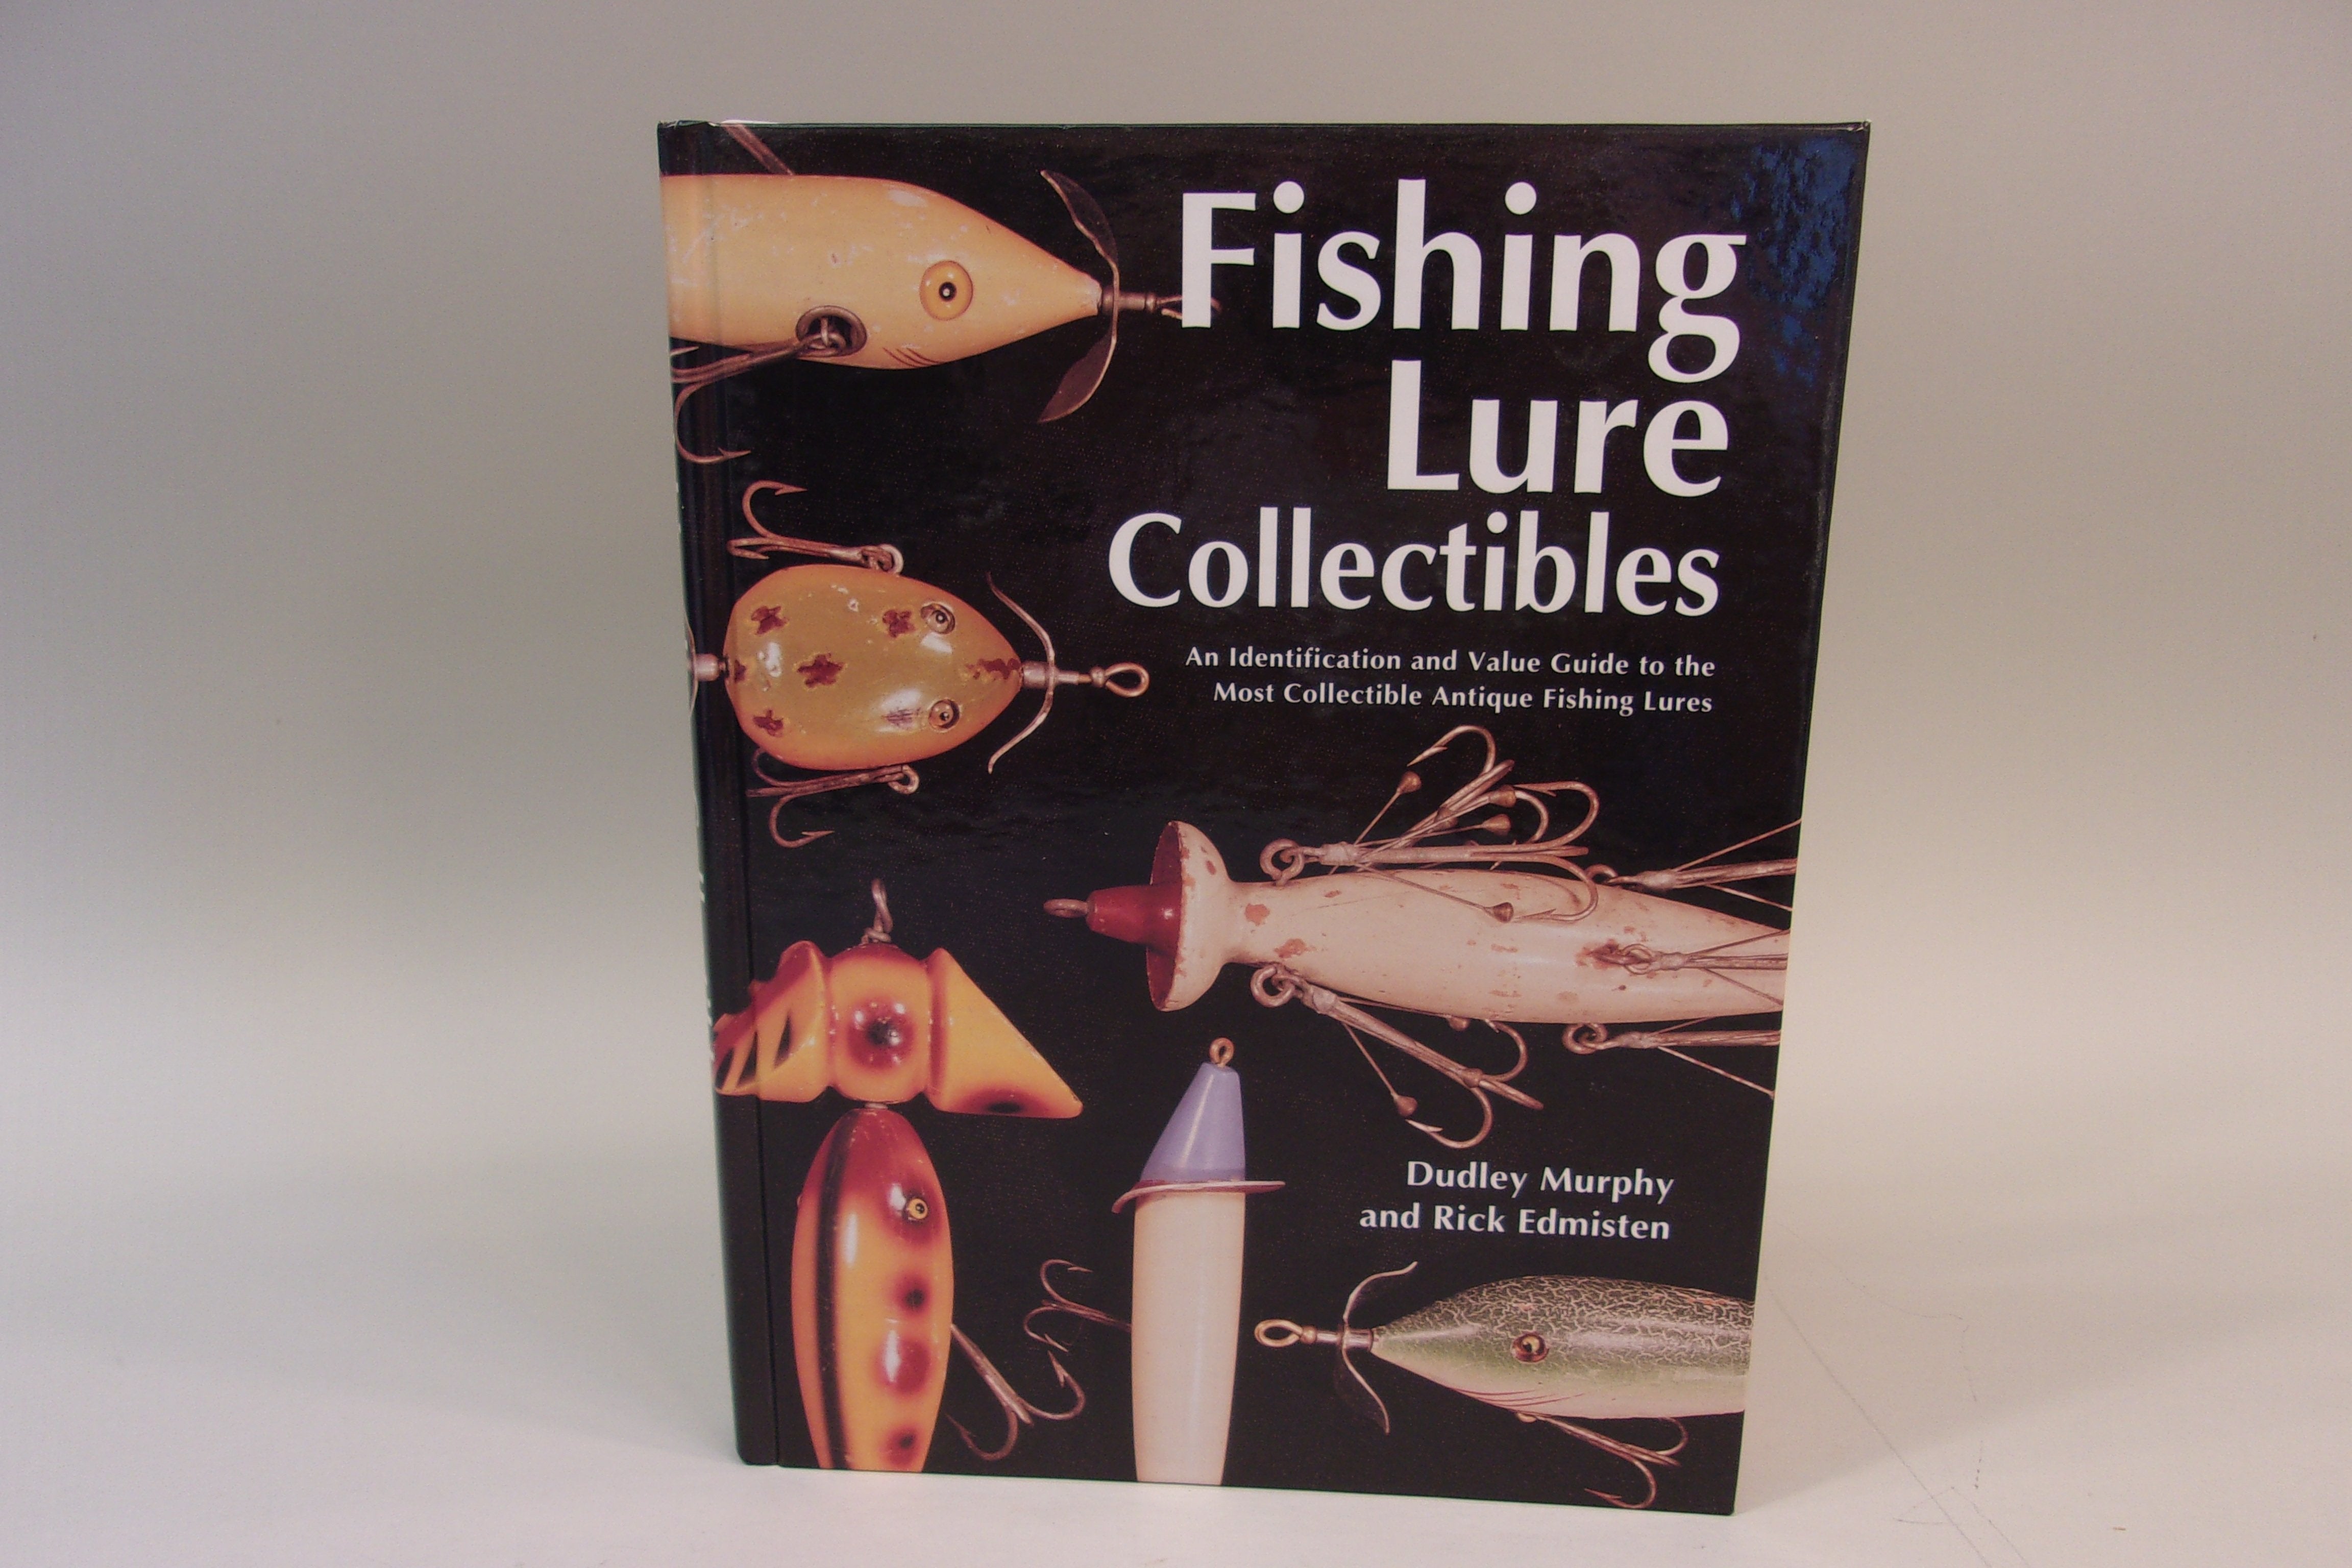 Vintage Fishing Book Cover